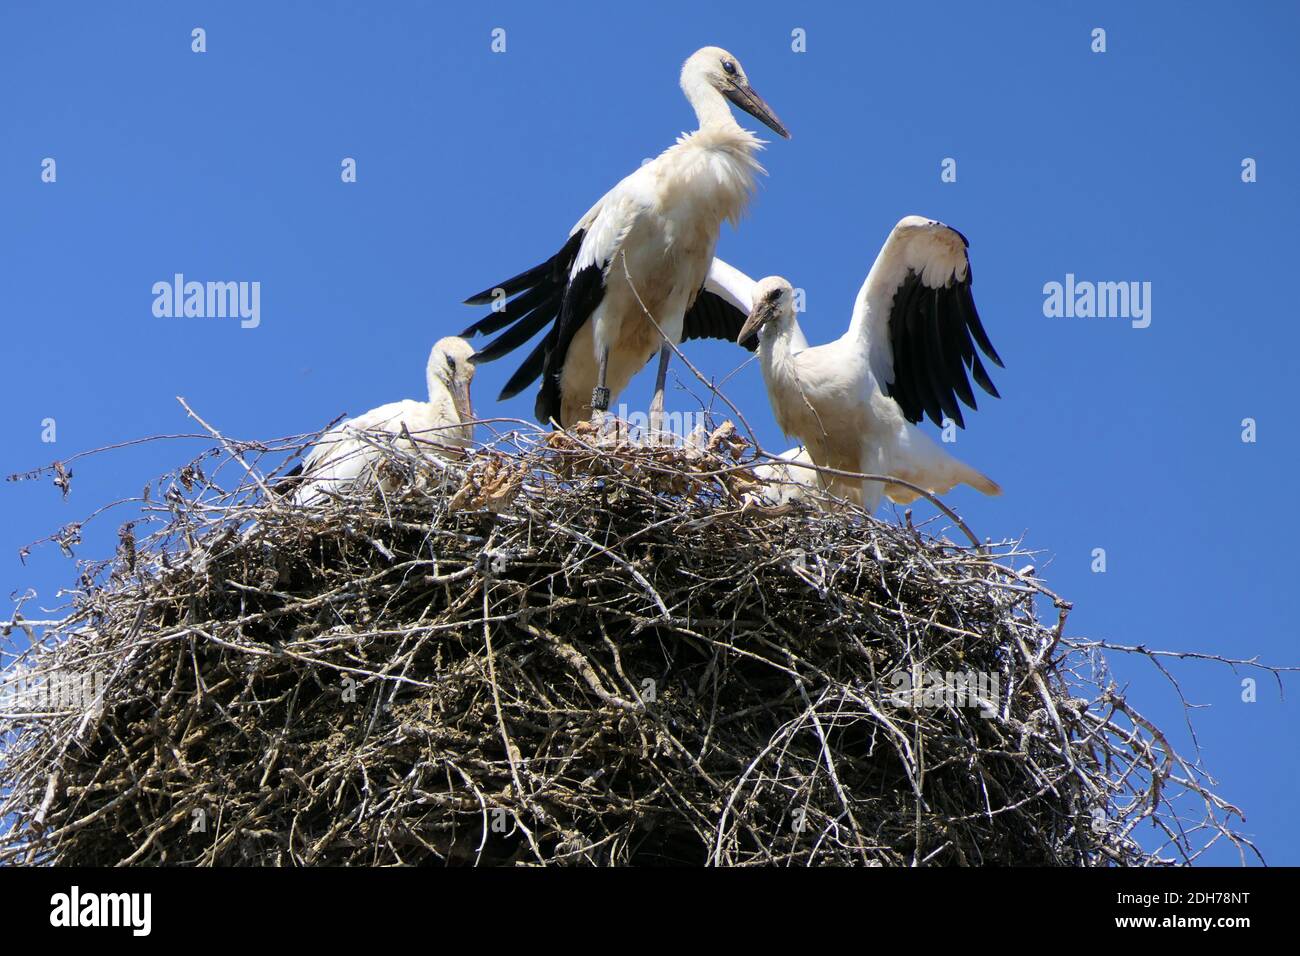 White stork family in their nest made of branches in front of a cloudless sky Stock Photo